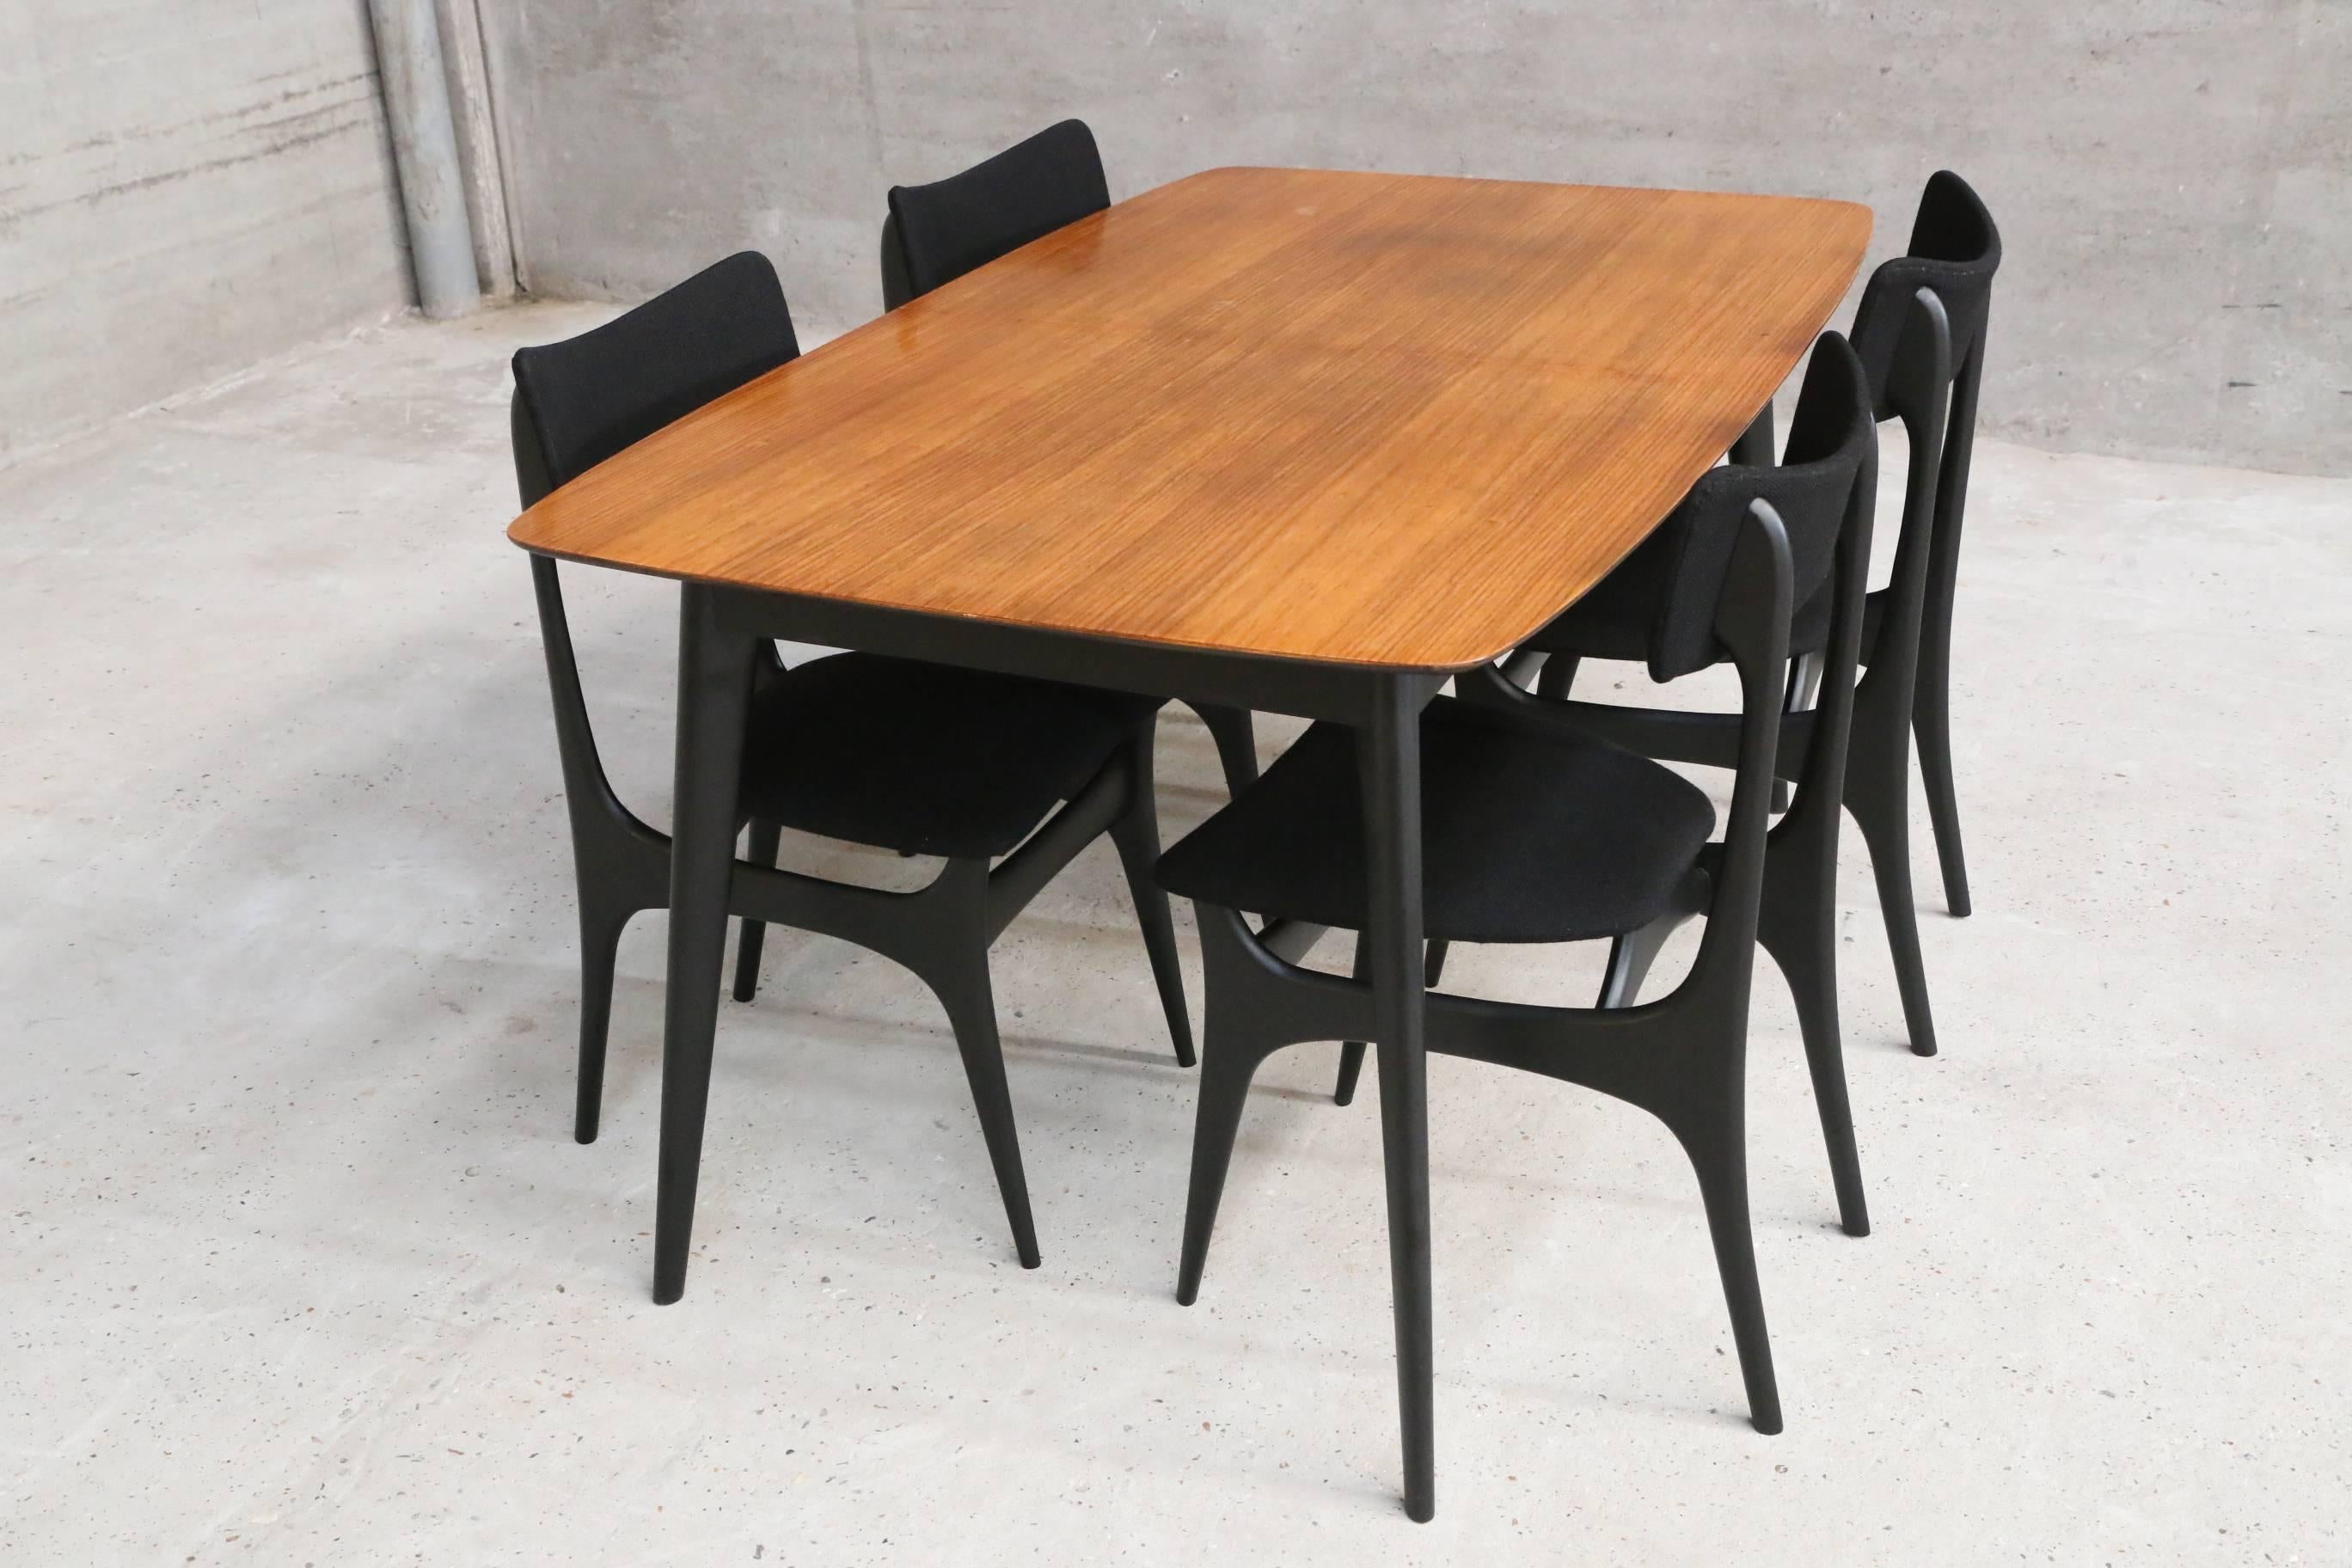 20th Century Modernist Dining Table, by Belgian Architect and Designer Alfred Hendrickx